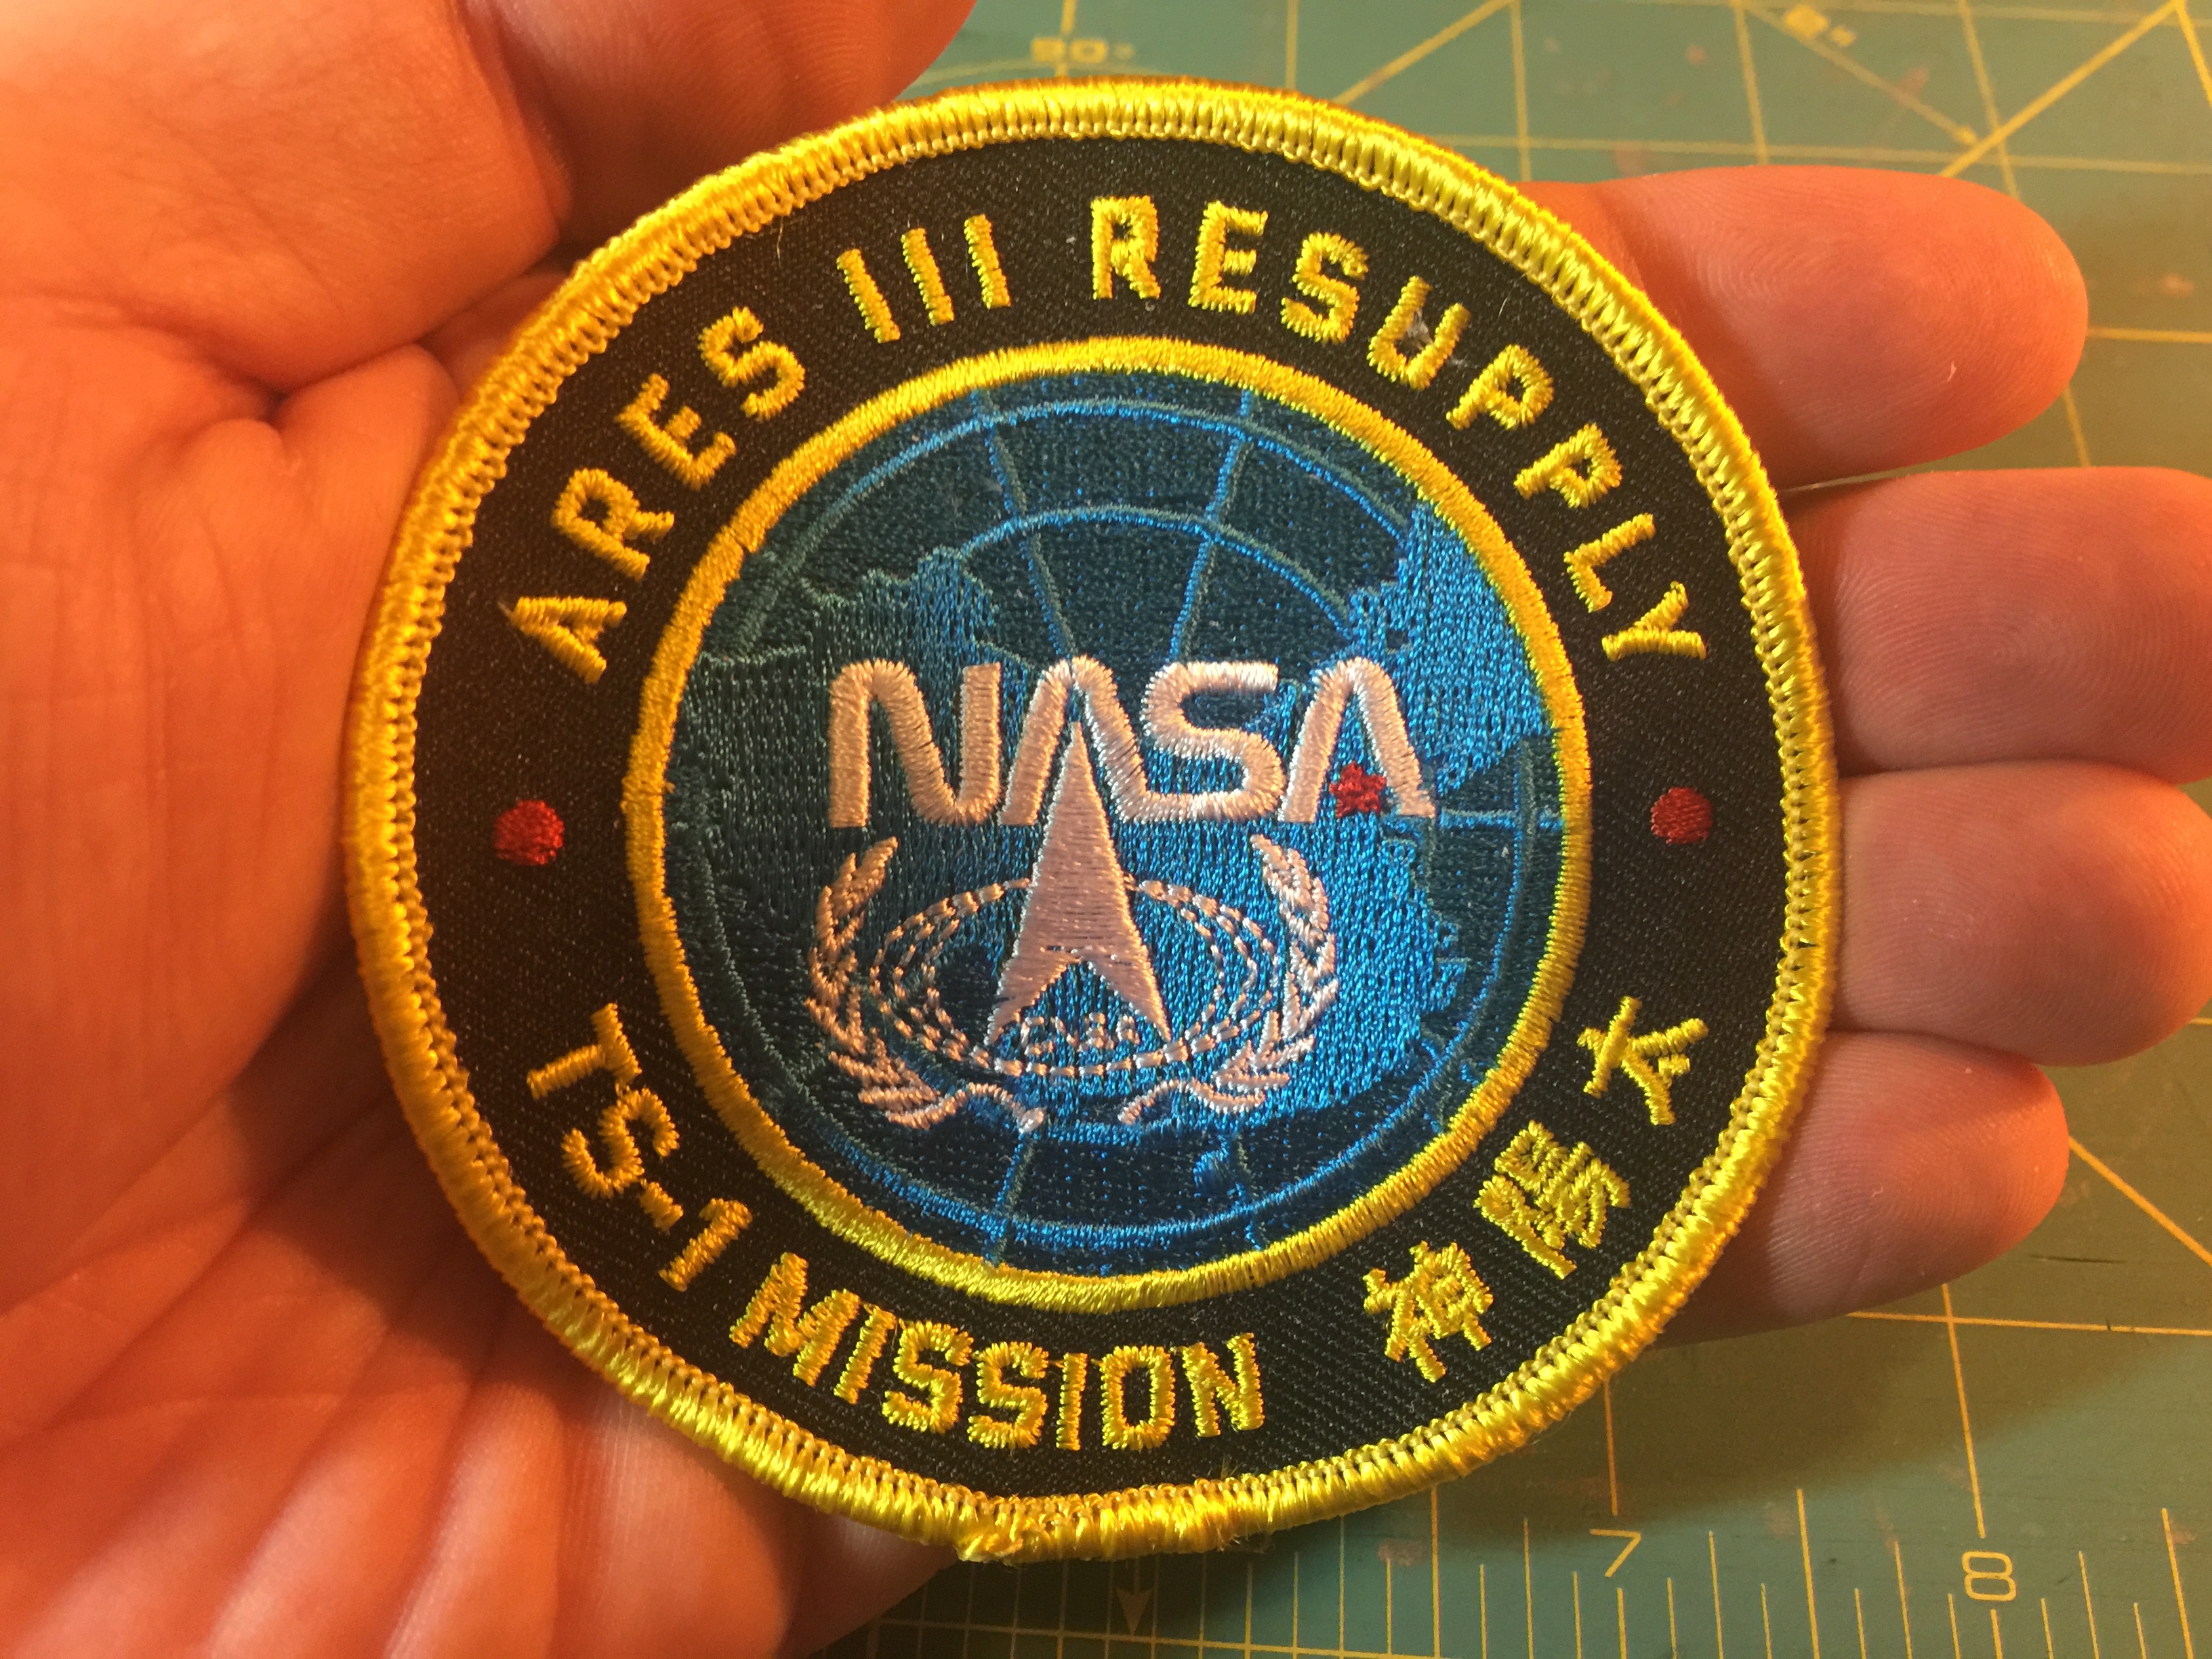 Final embroidered patch for The Martian: Taiyang Shen - ARES III Resupply mission.